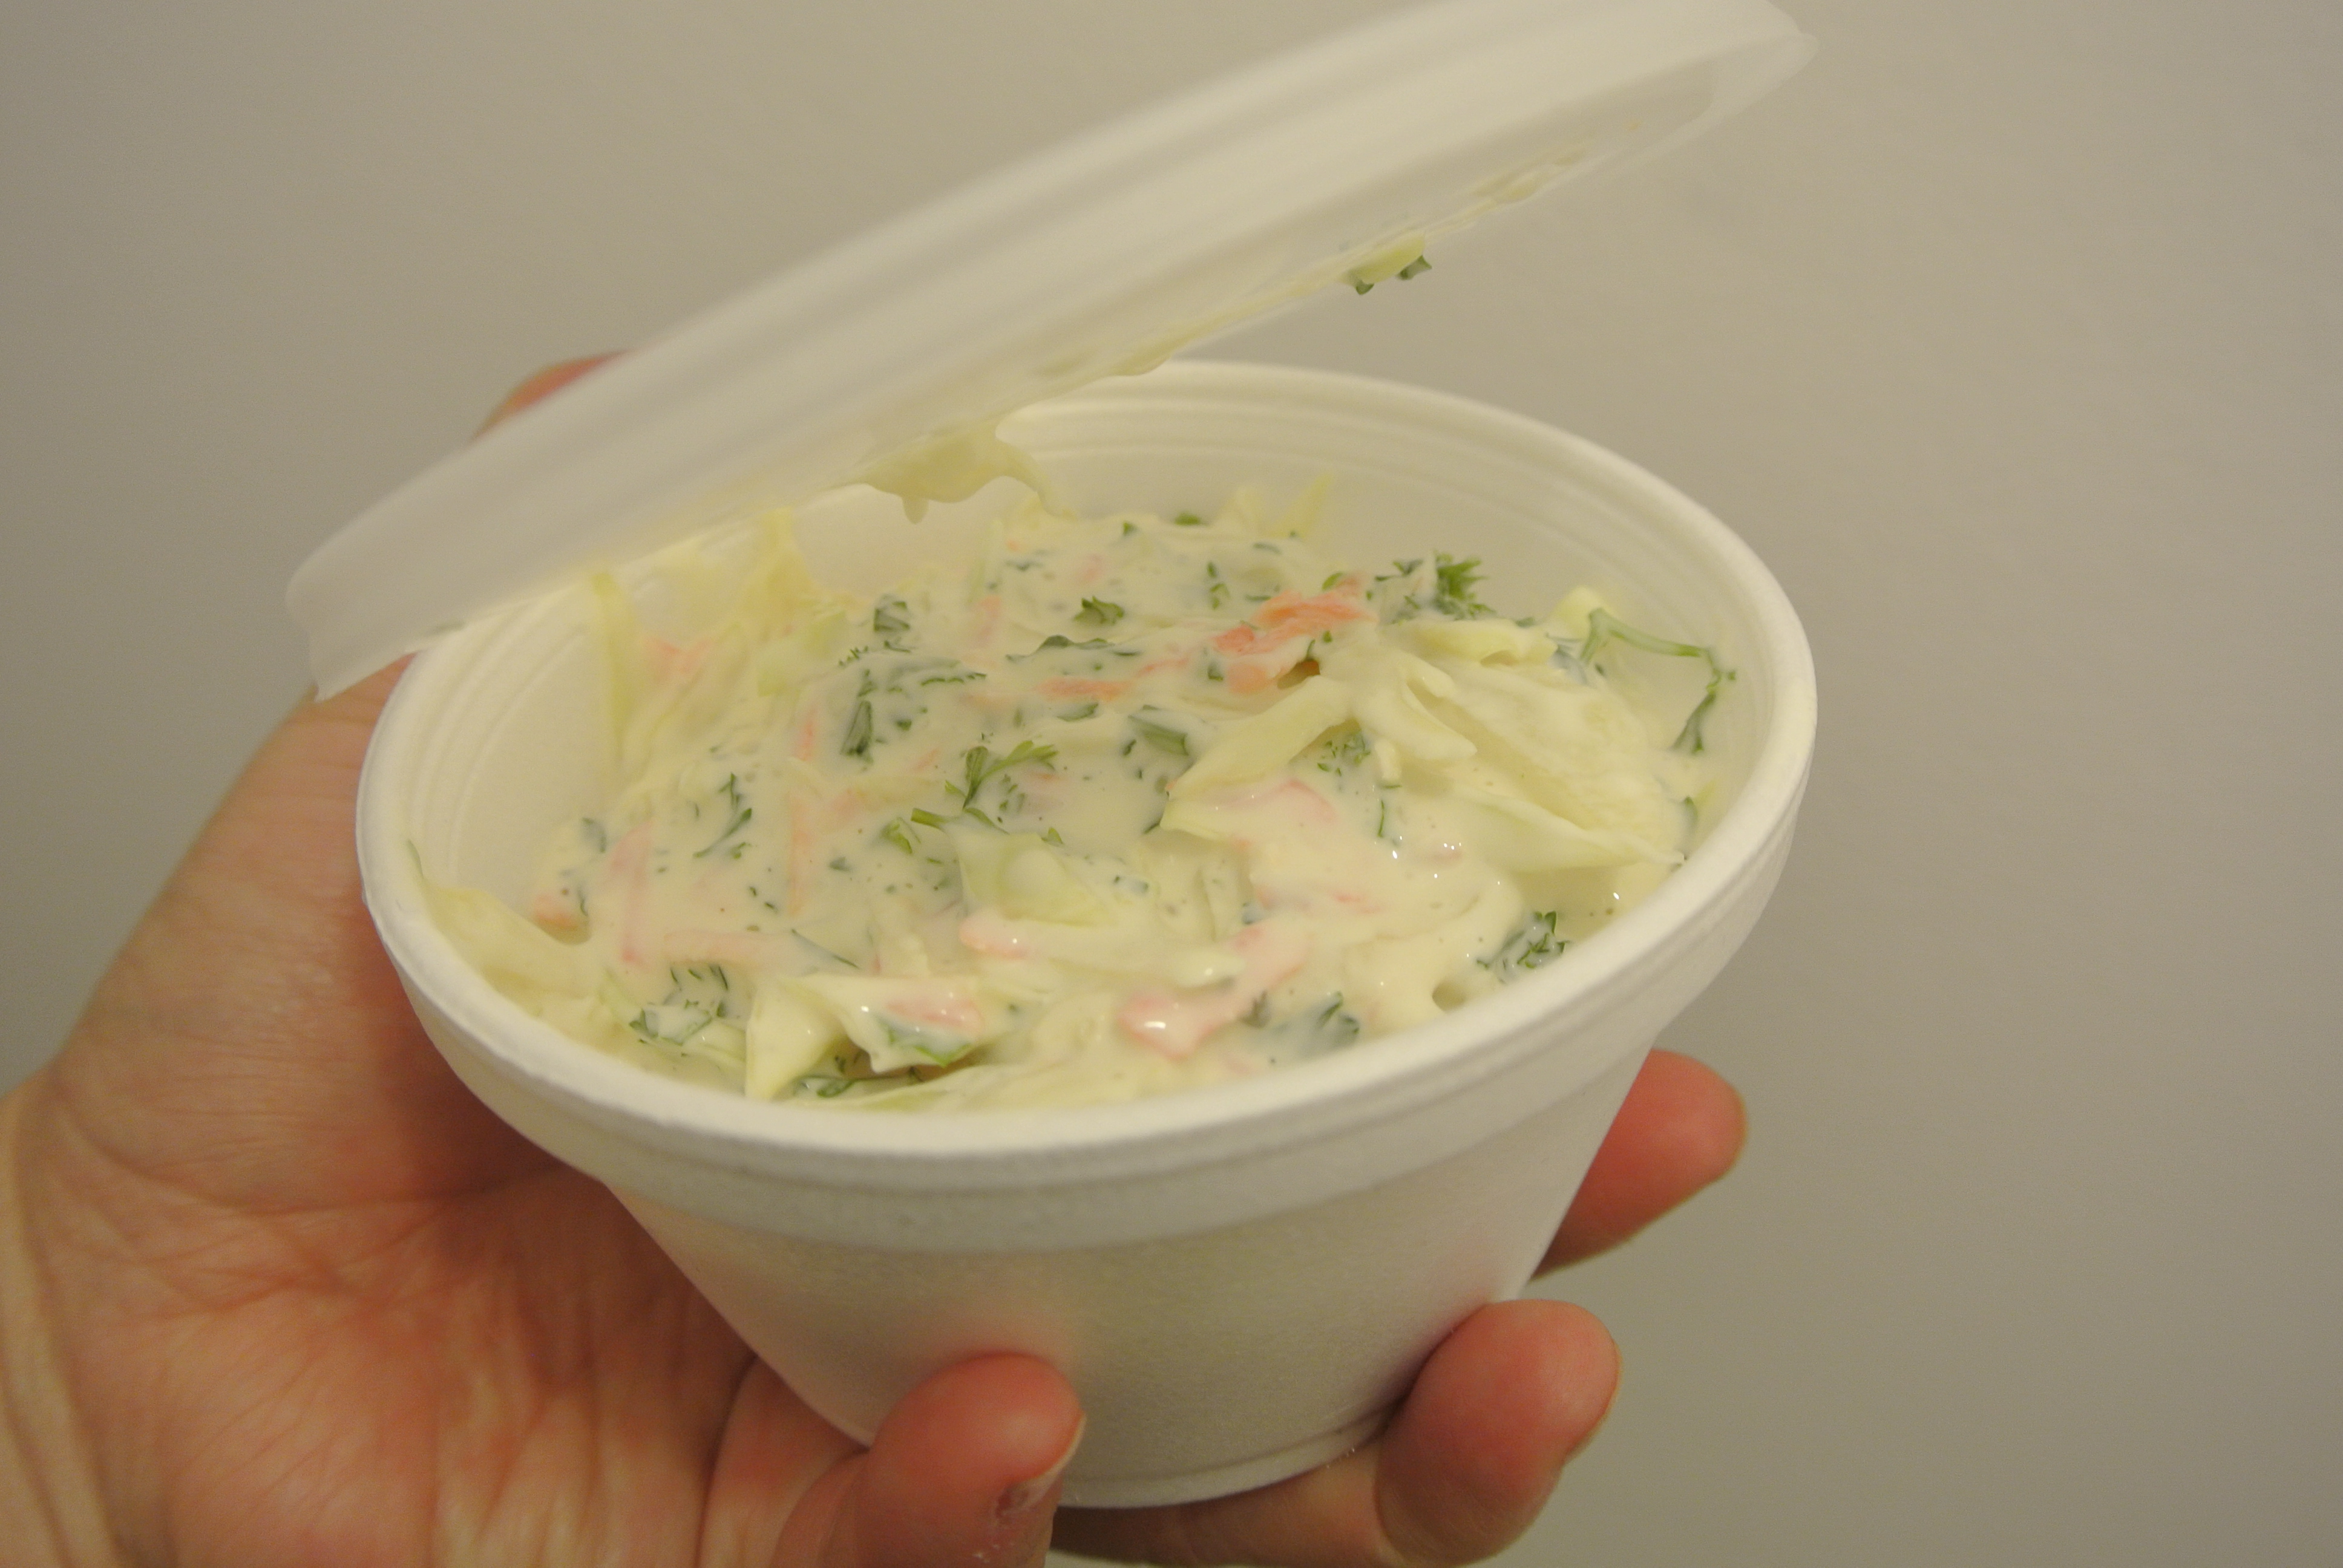 Purchased a side order of coleslaw.